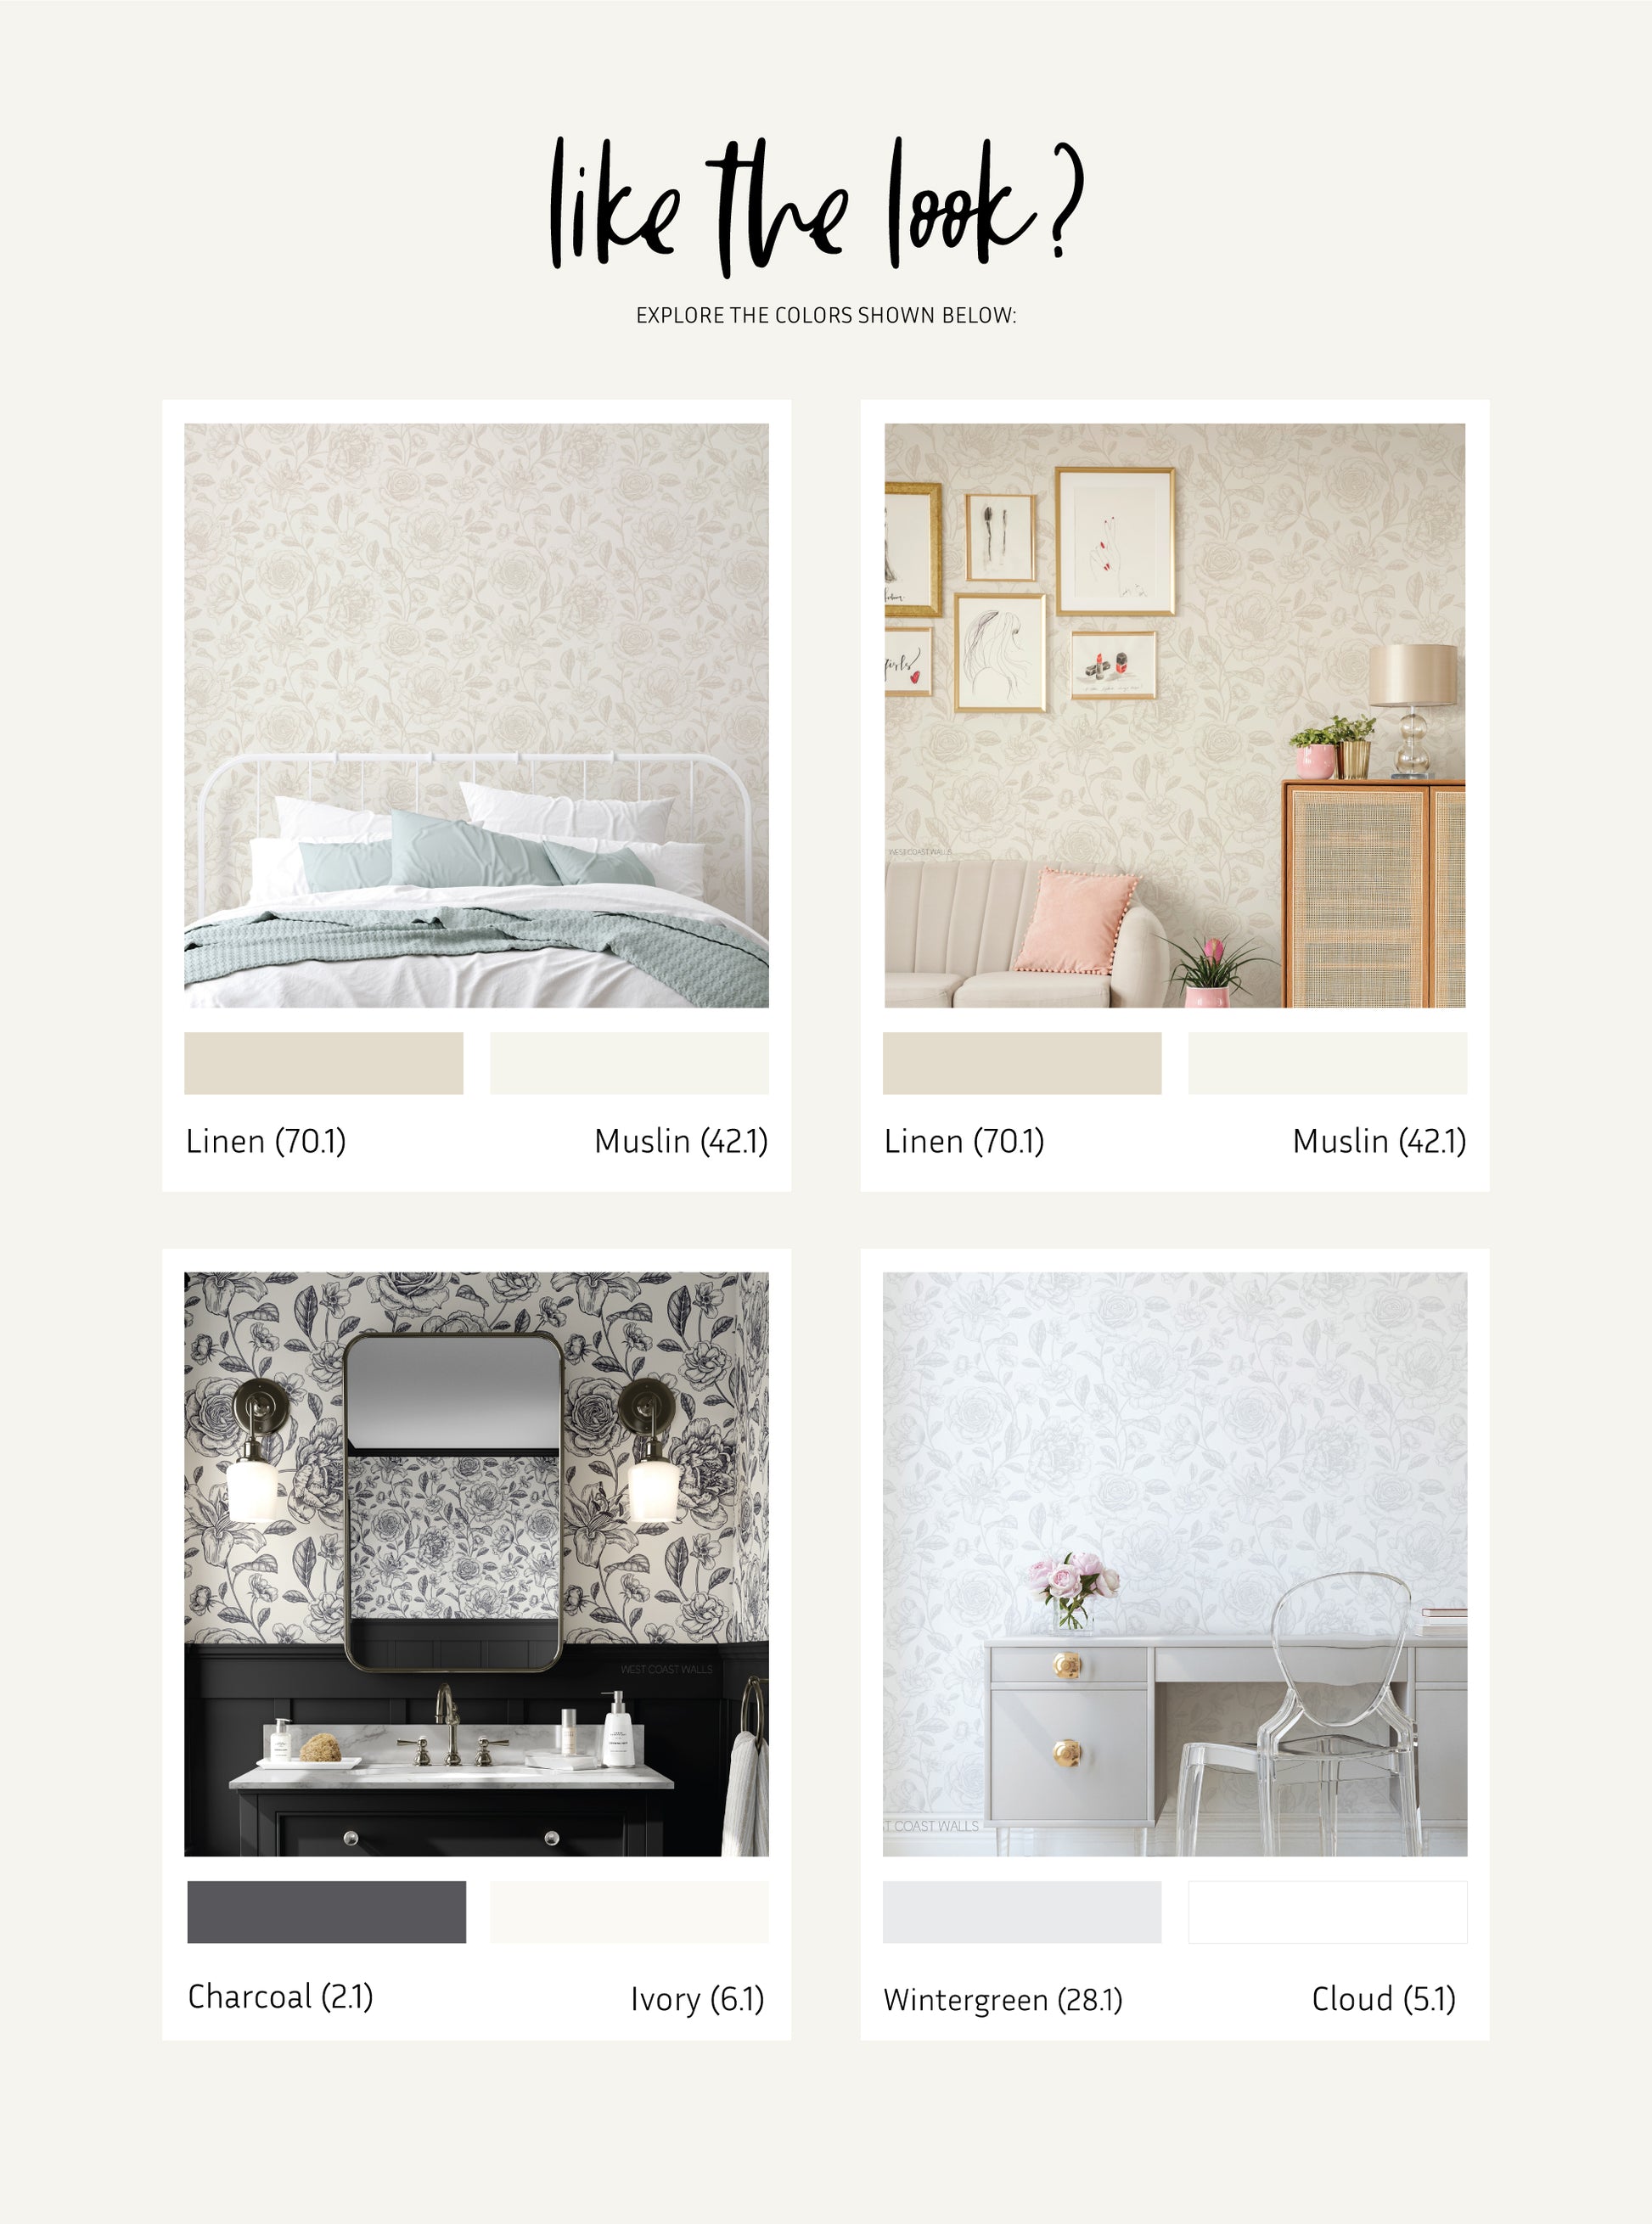 a website page for a furniture store